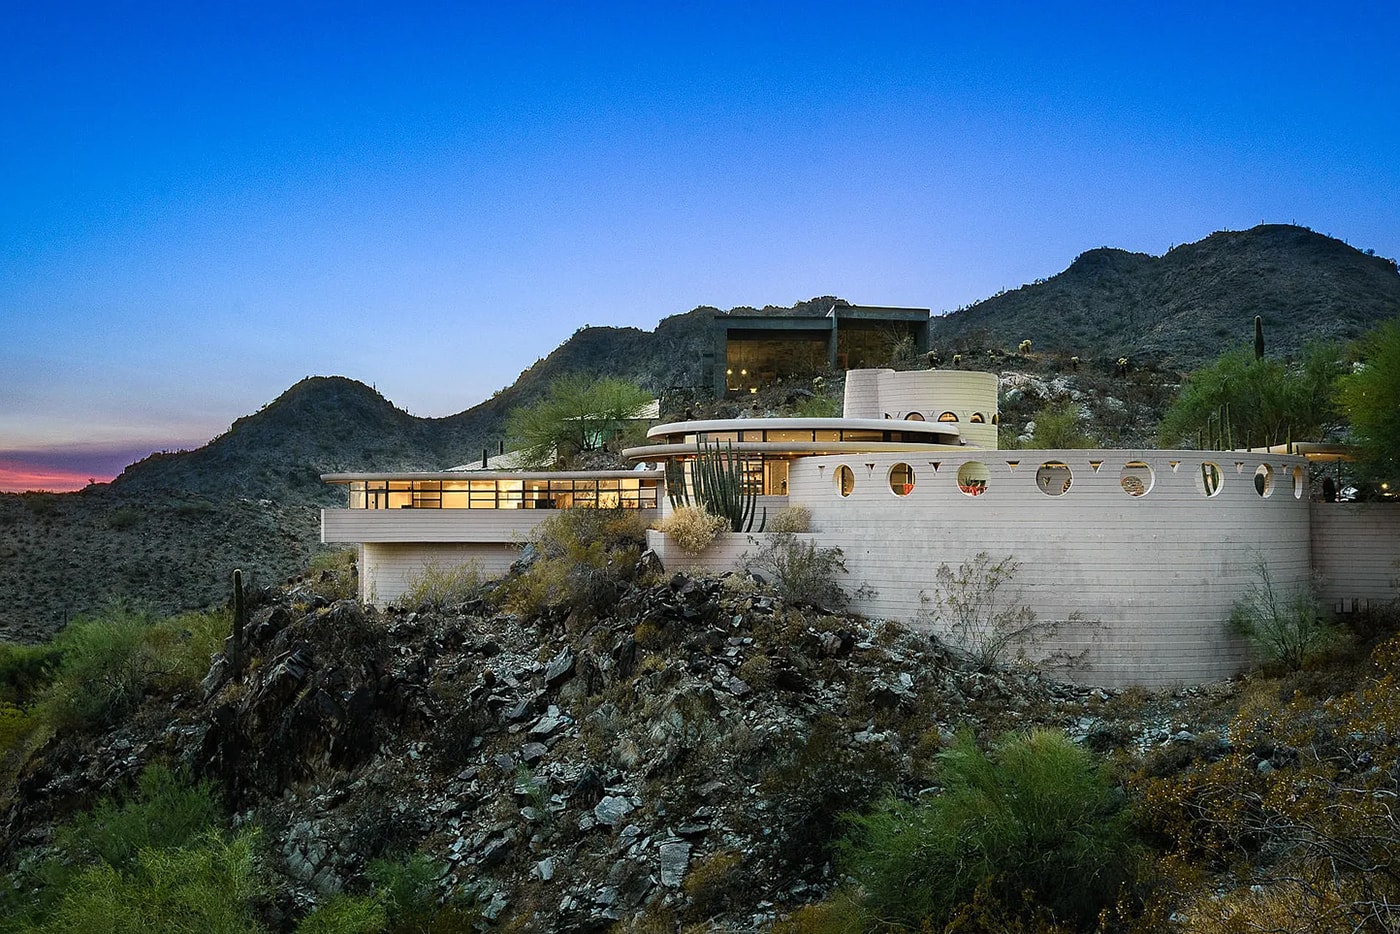 Listings: Frank Lloyd Wright's Last-Ever Home Goes is for Sale